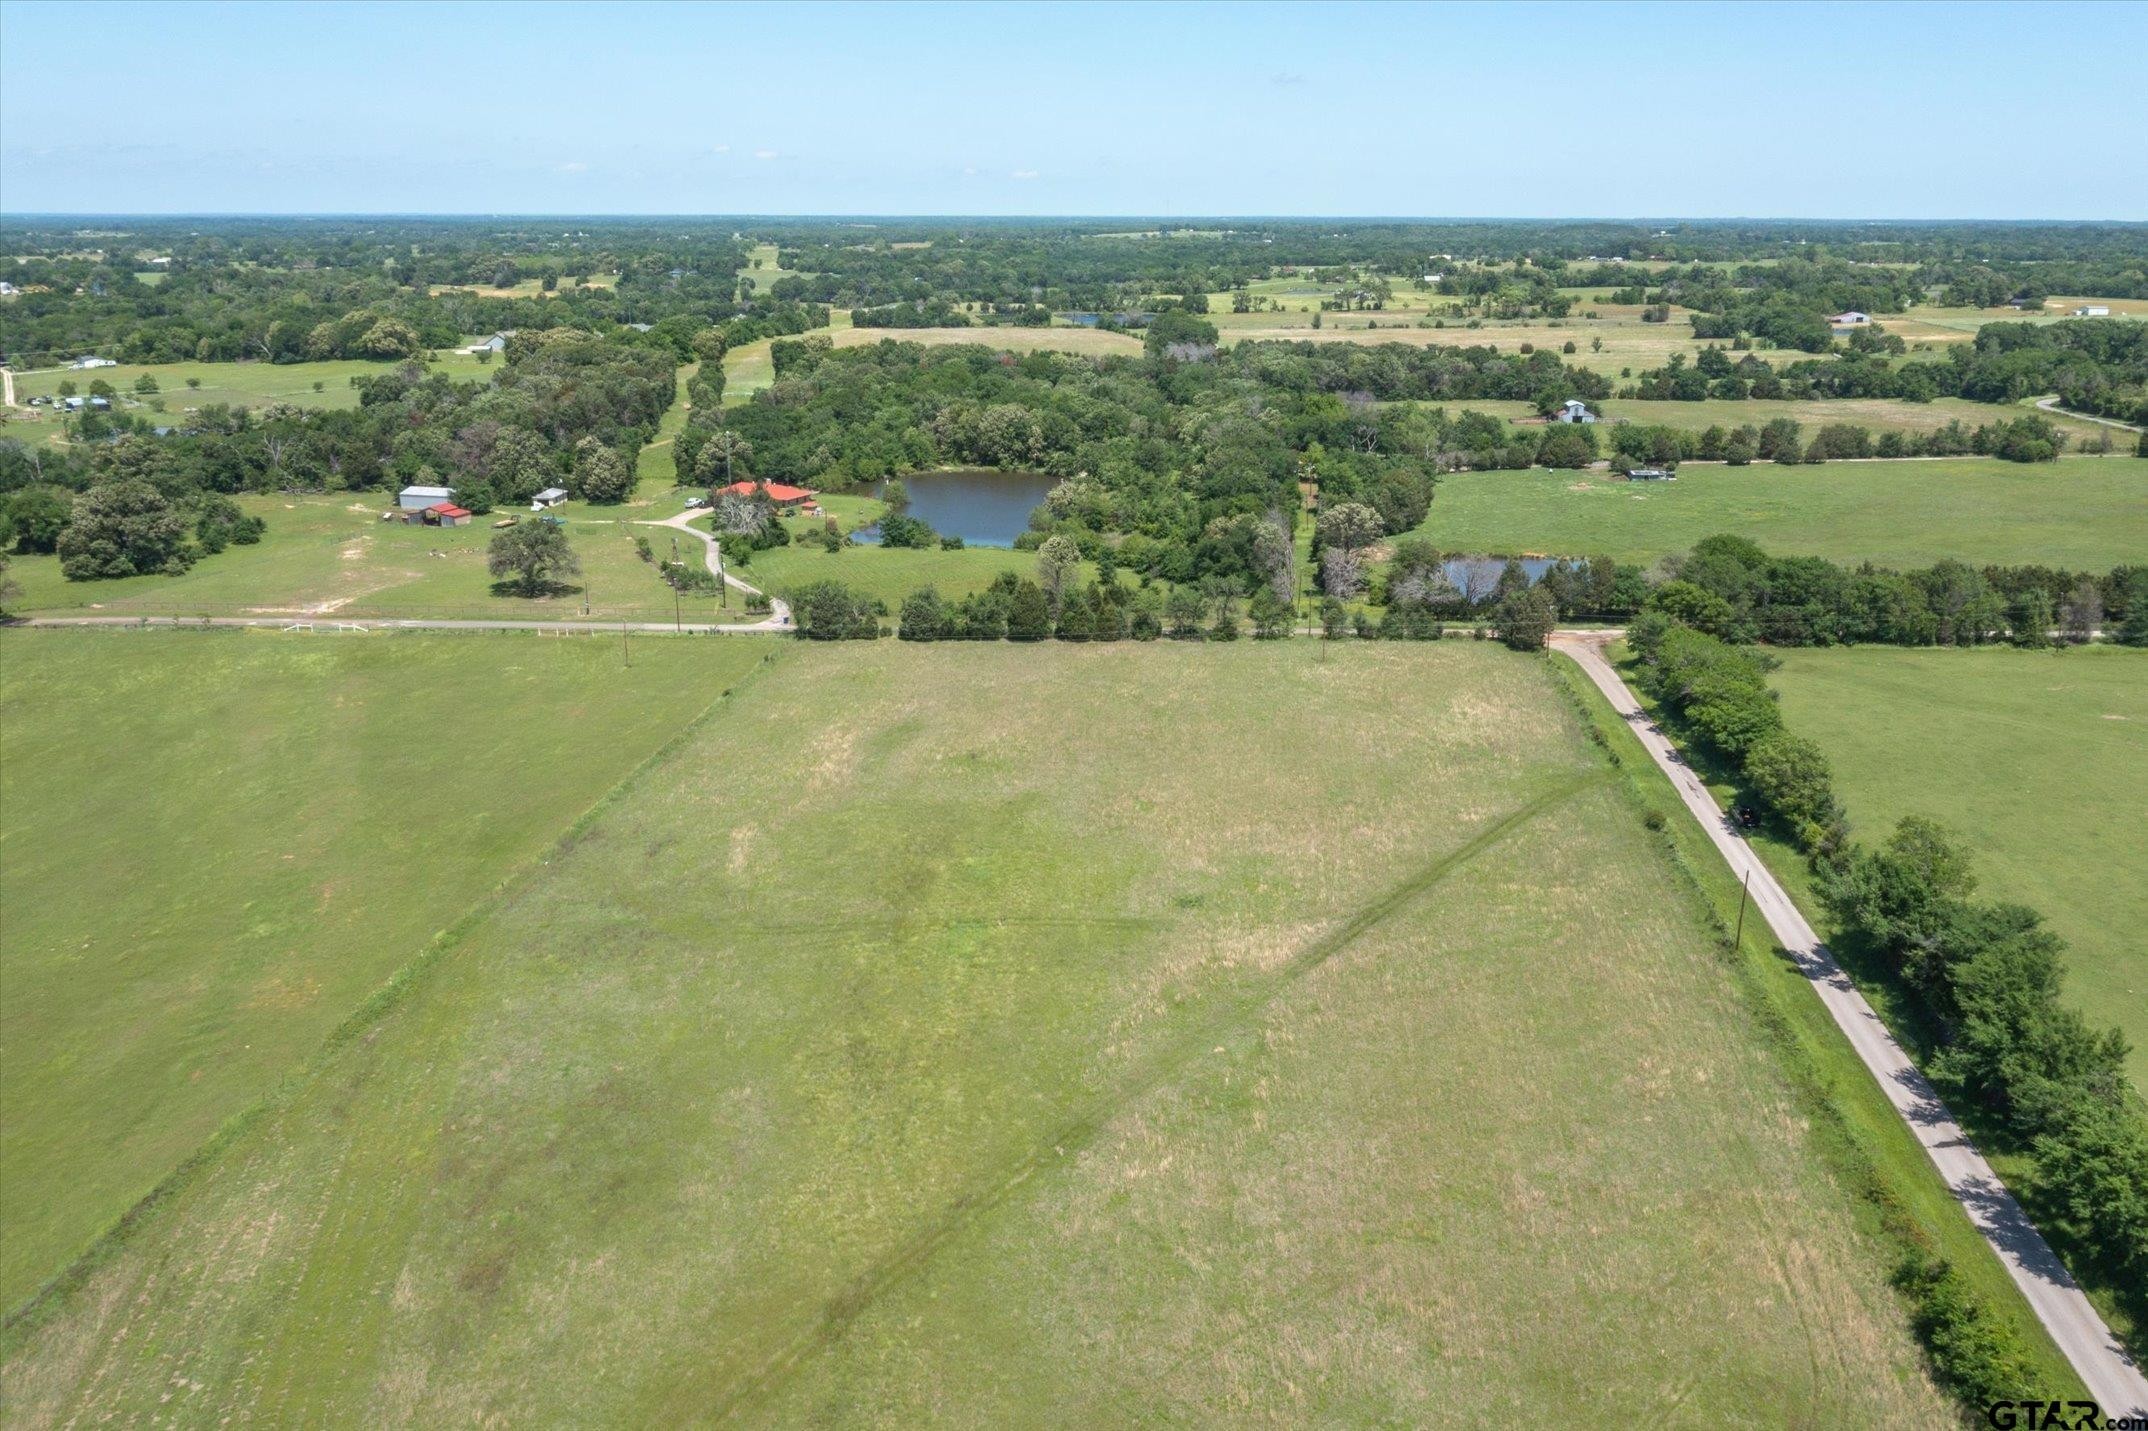 13. Tbd Lot 3 (Canton Isd) Vz County Road 2312